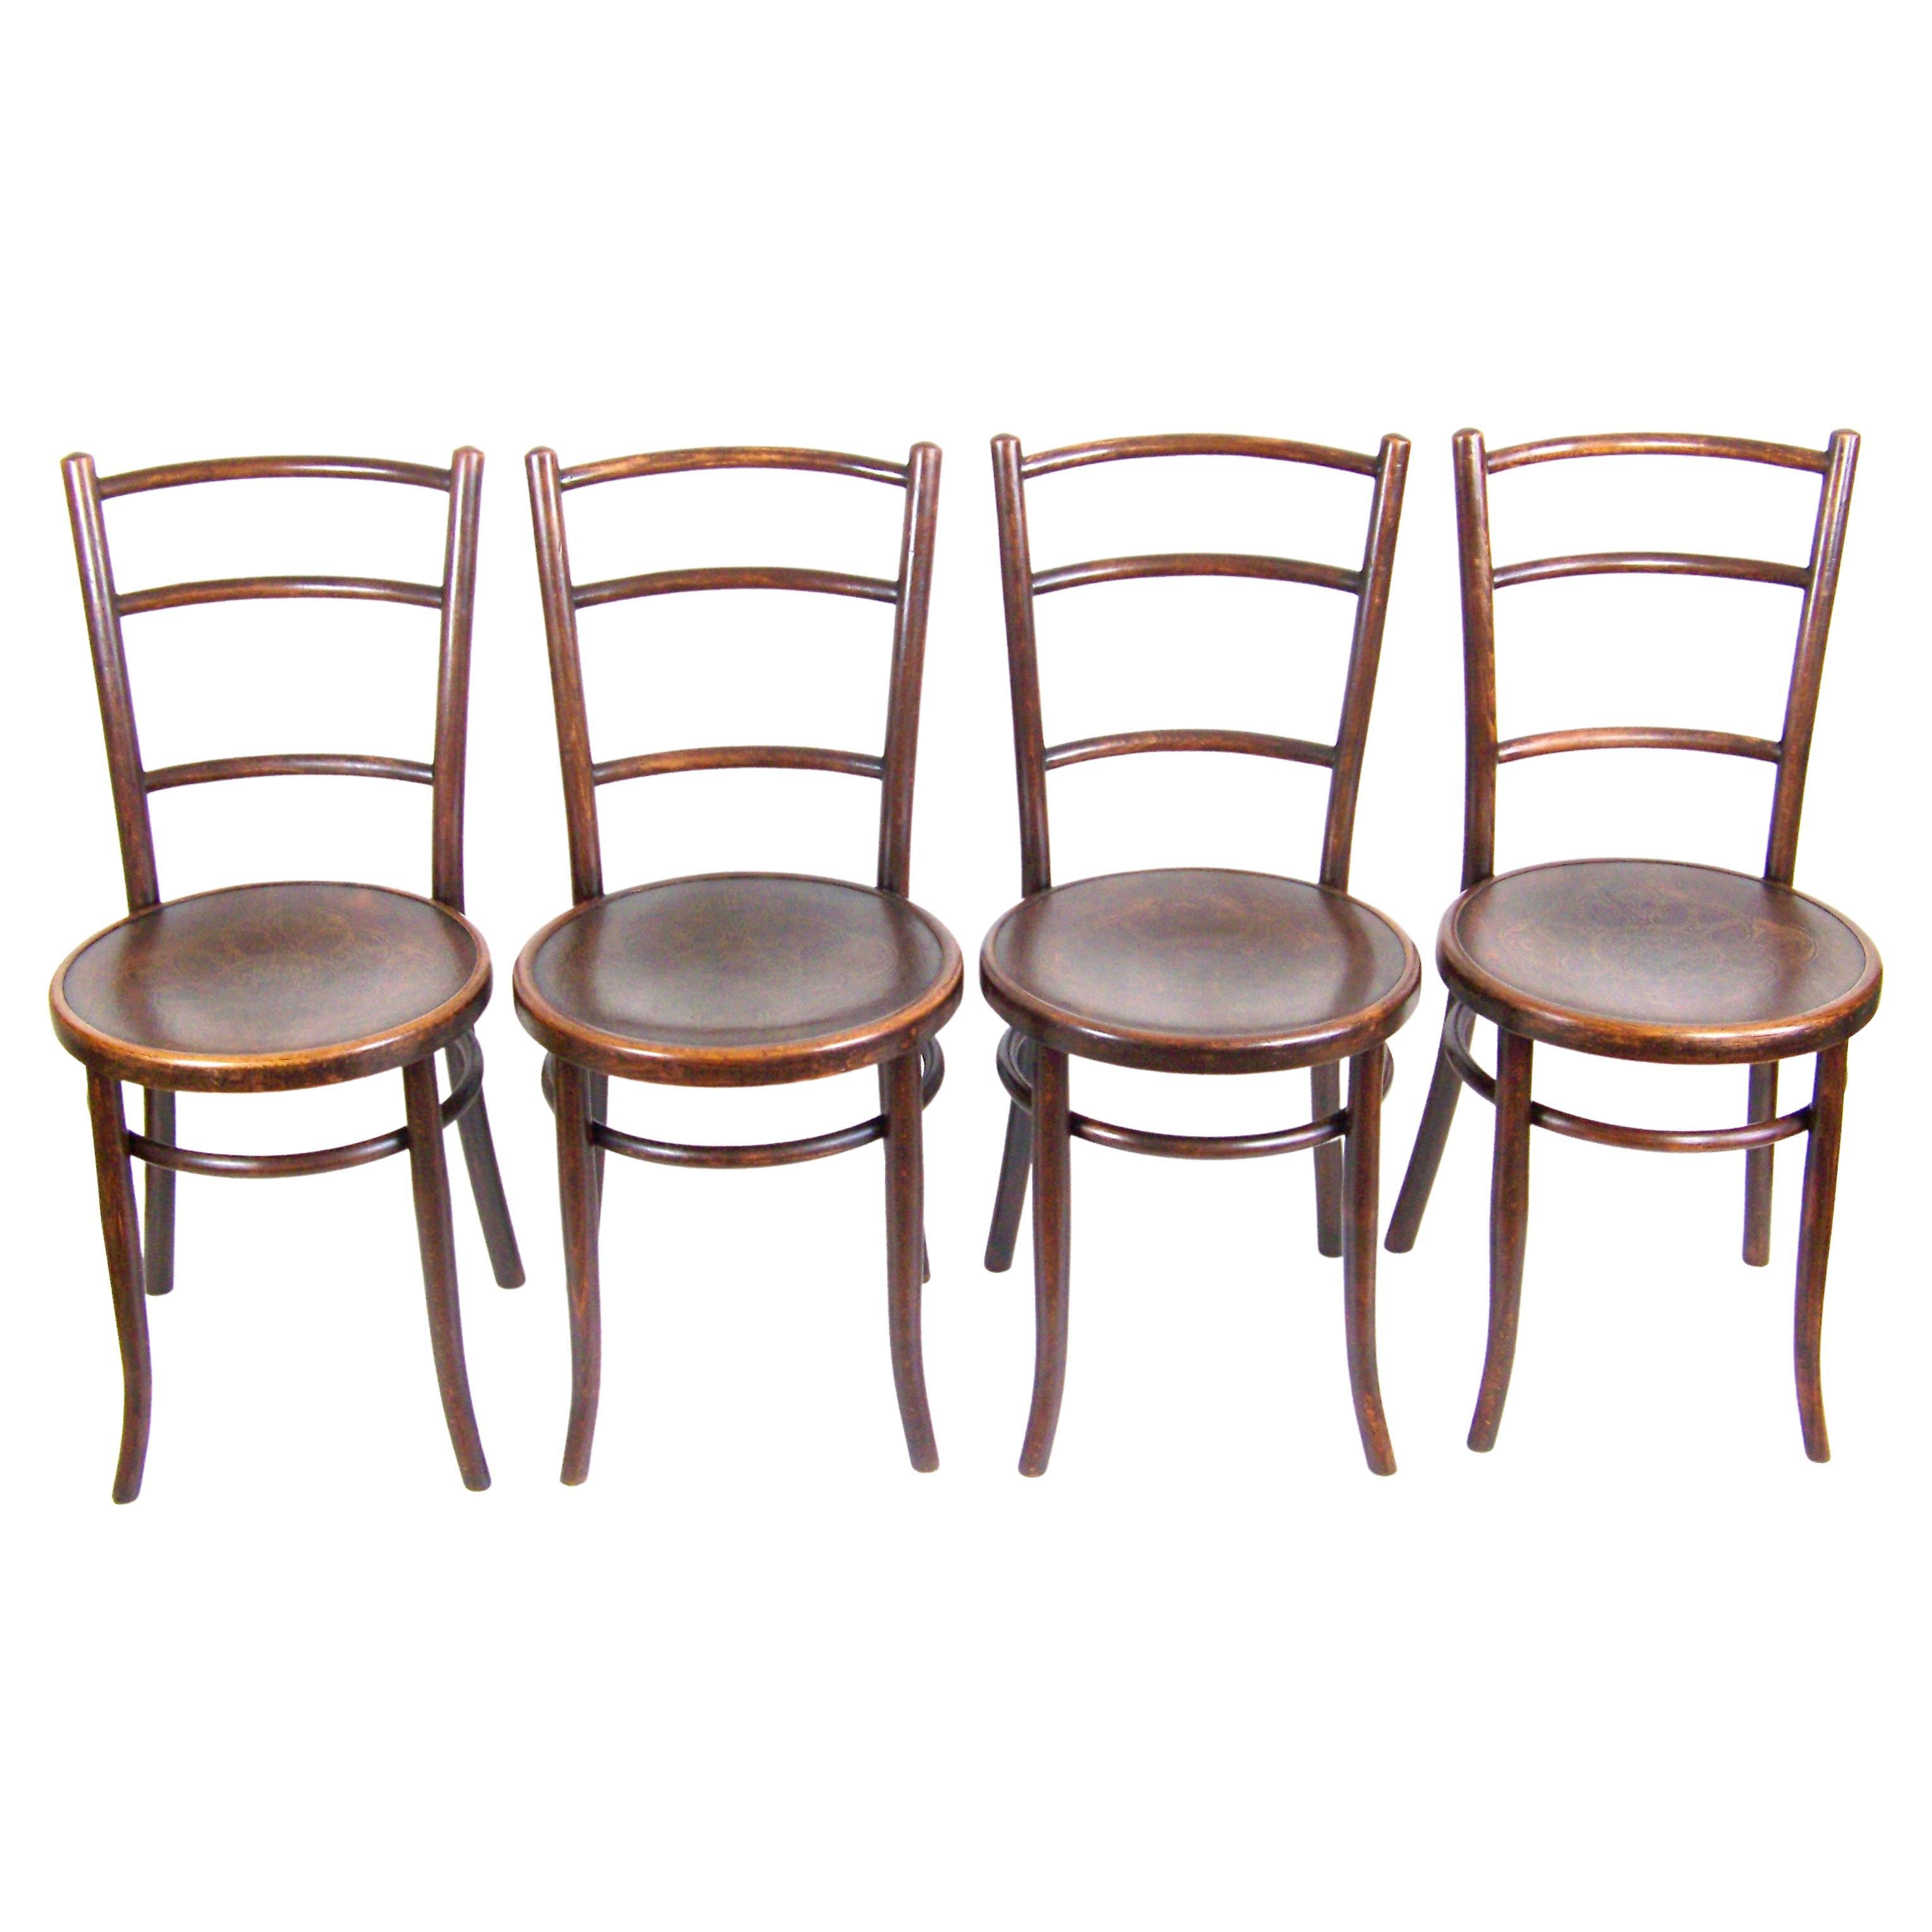 Four Chairs Thonet